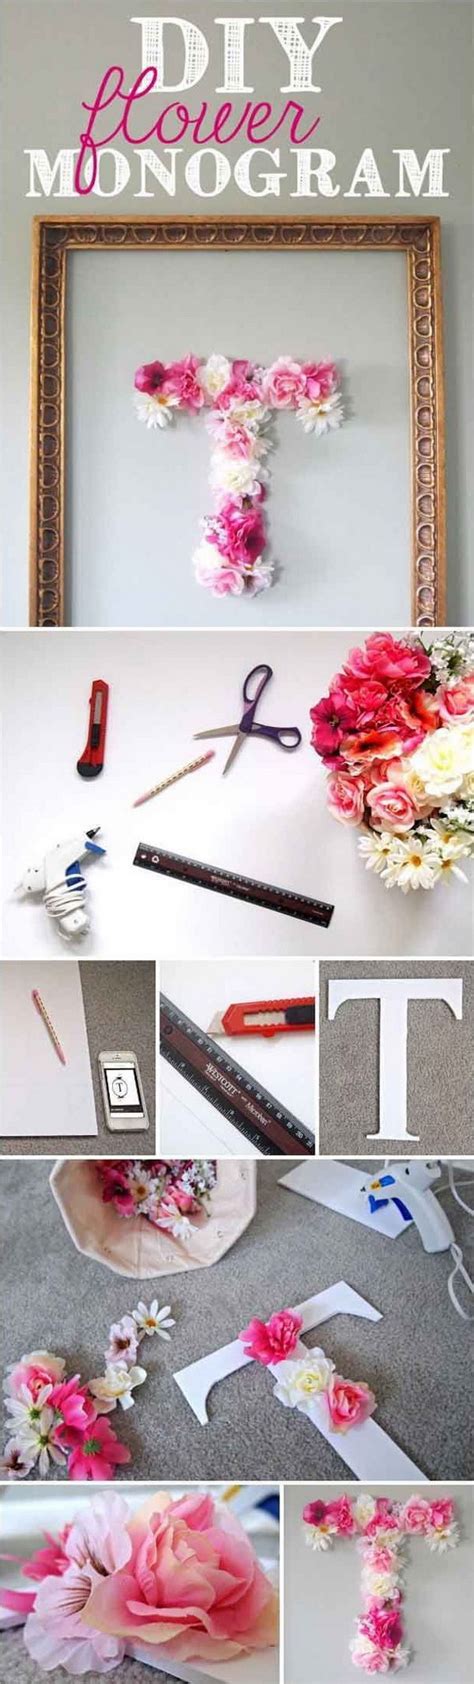 Teenagers spend a lot of time in their bedrooms studying, entertaining friends and escaping from the world, so it can be. 25+ DIY Ideas & Tutorials for Teenage Girl's Room ...